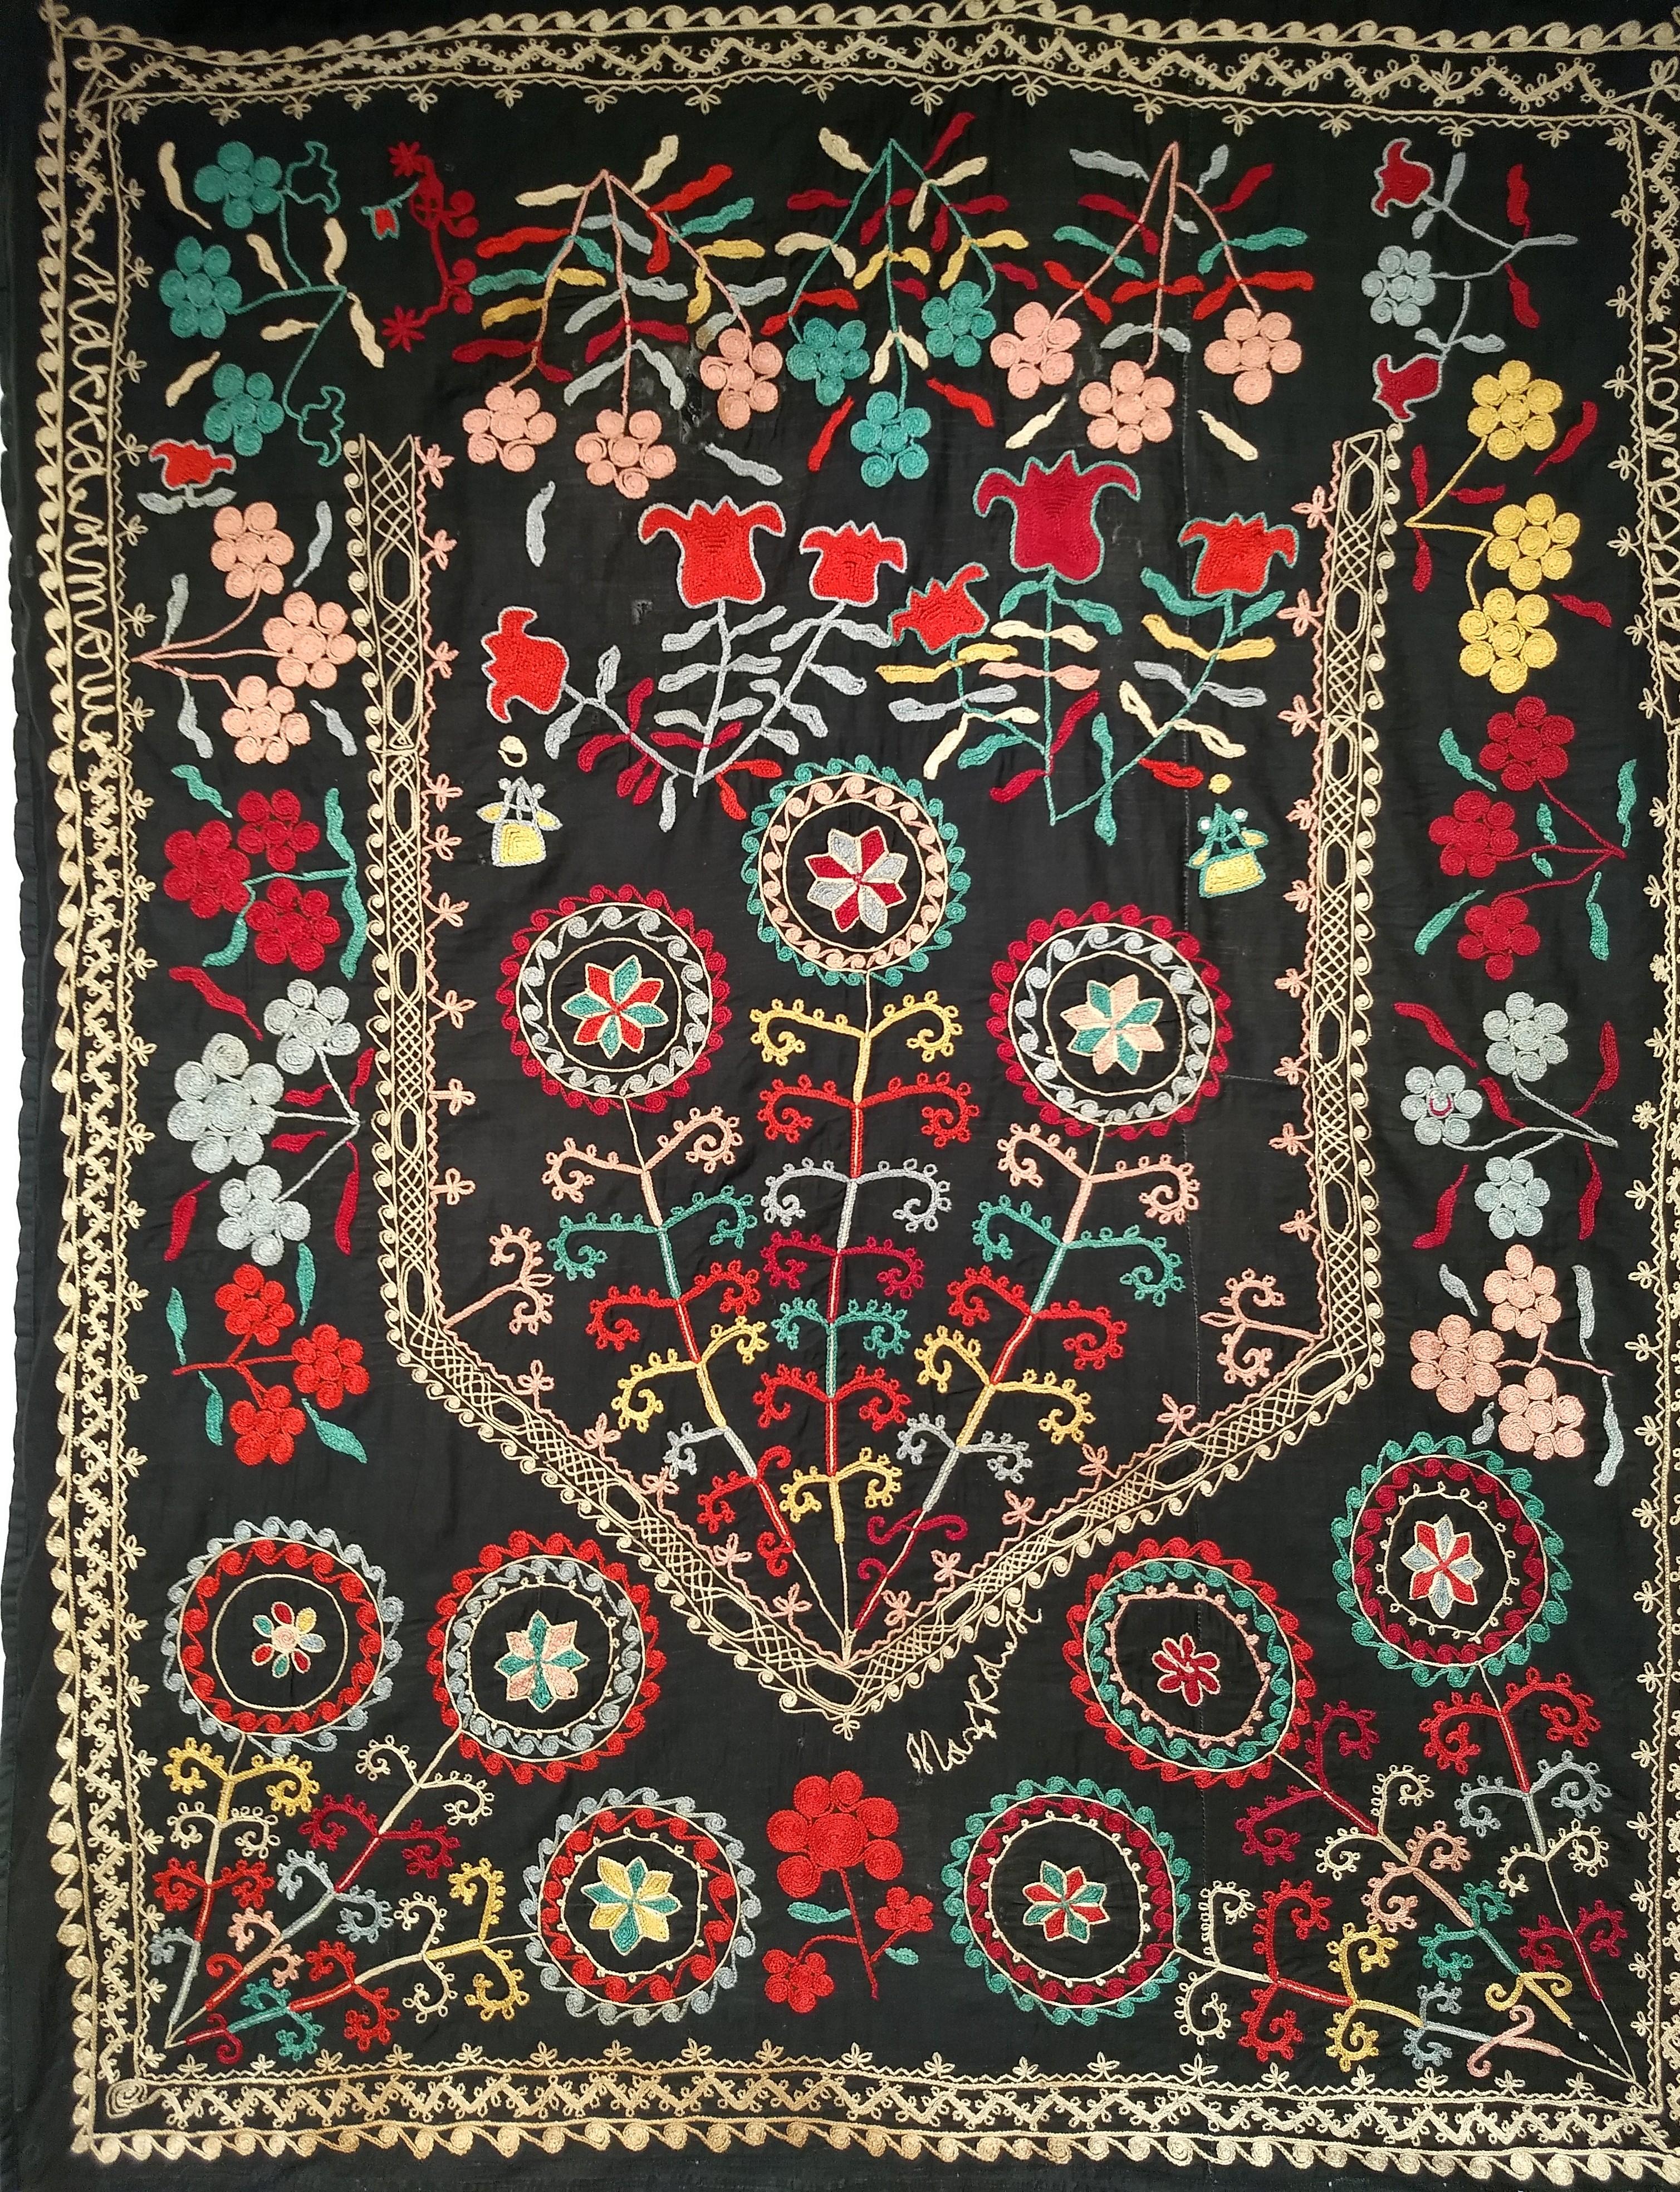 Vintage Hand Embroidered Uzbek Silk Suzani in Black, Red, Green, Yellow Wall Art In Good Condition For Sale In Barrington, IL